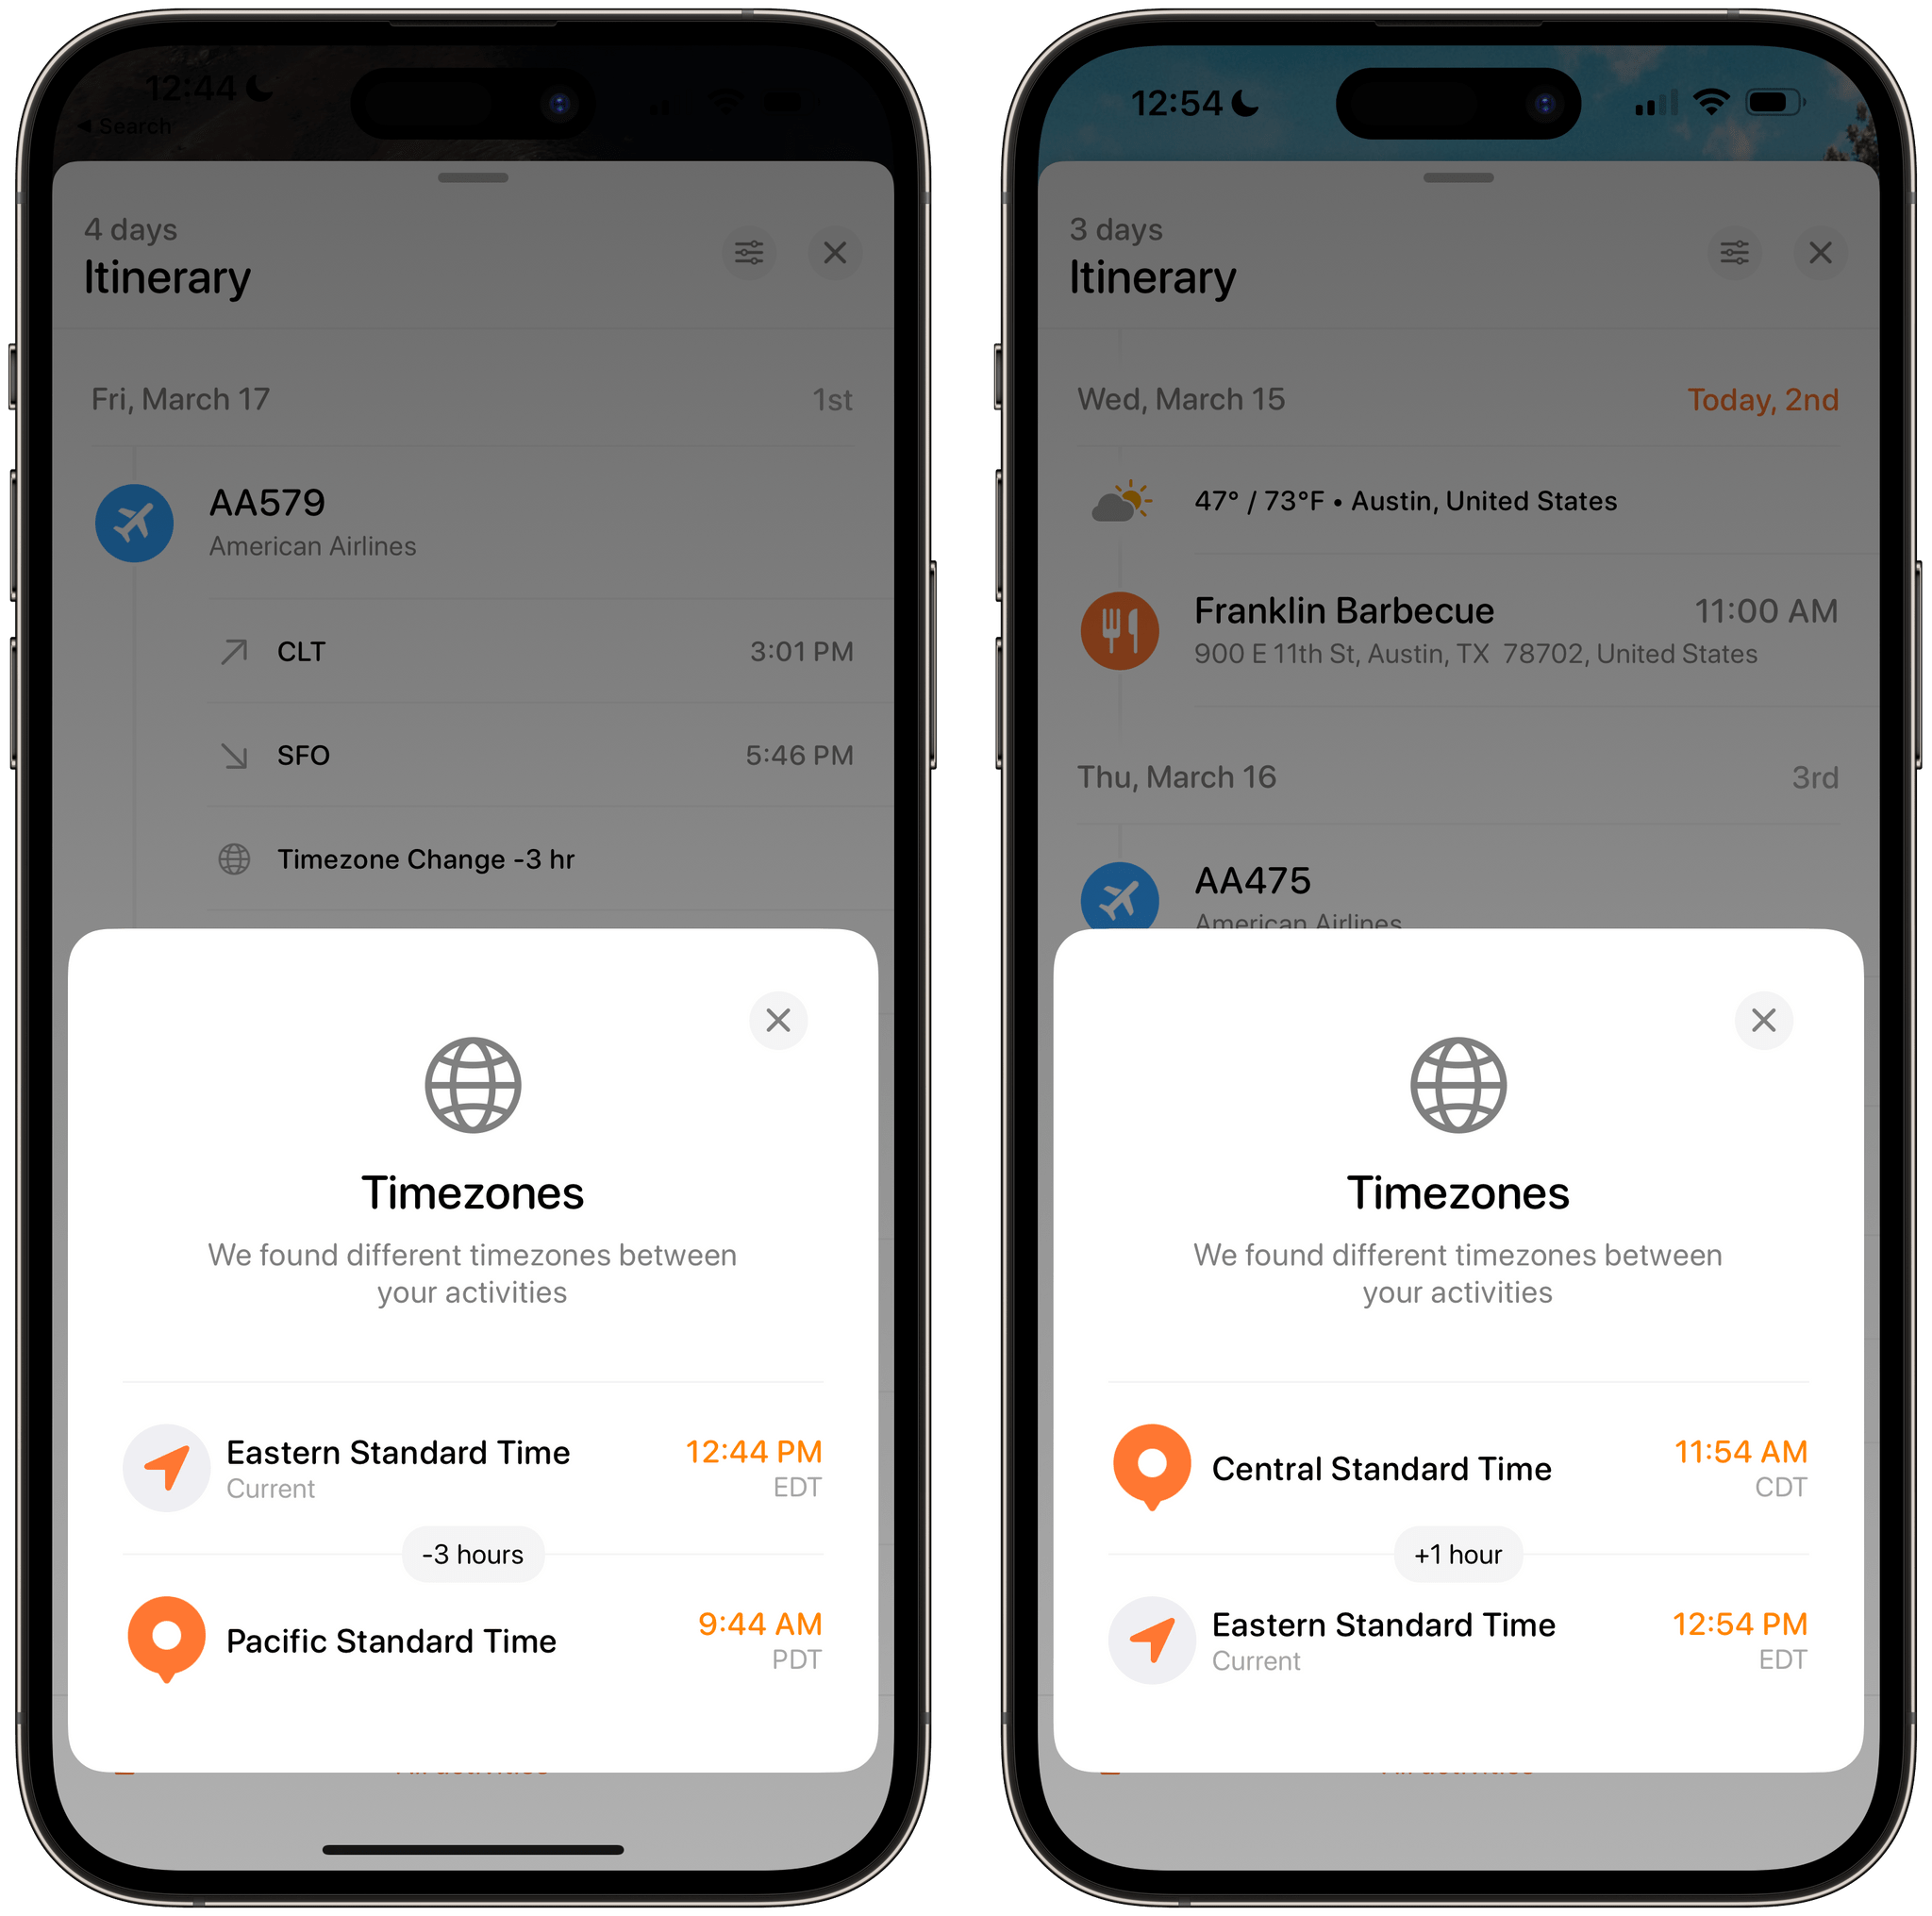 Tripsy has made it easier to keep track of time changes as you travel.